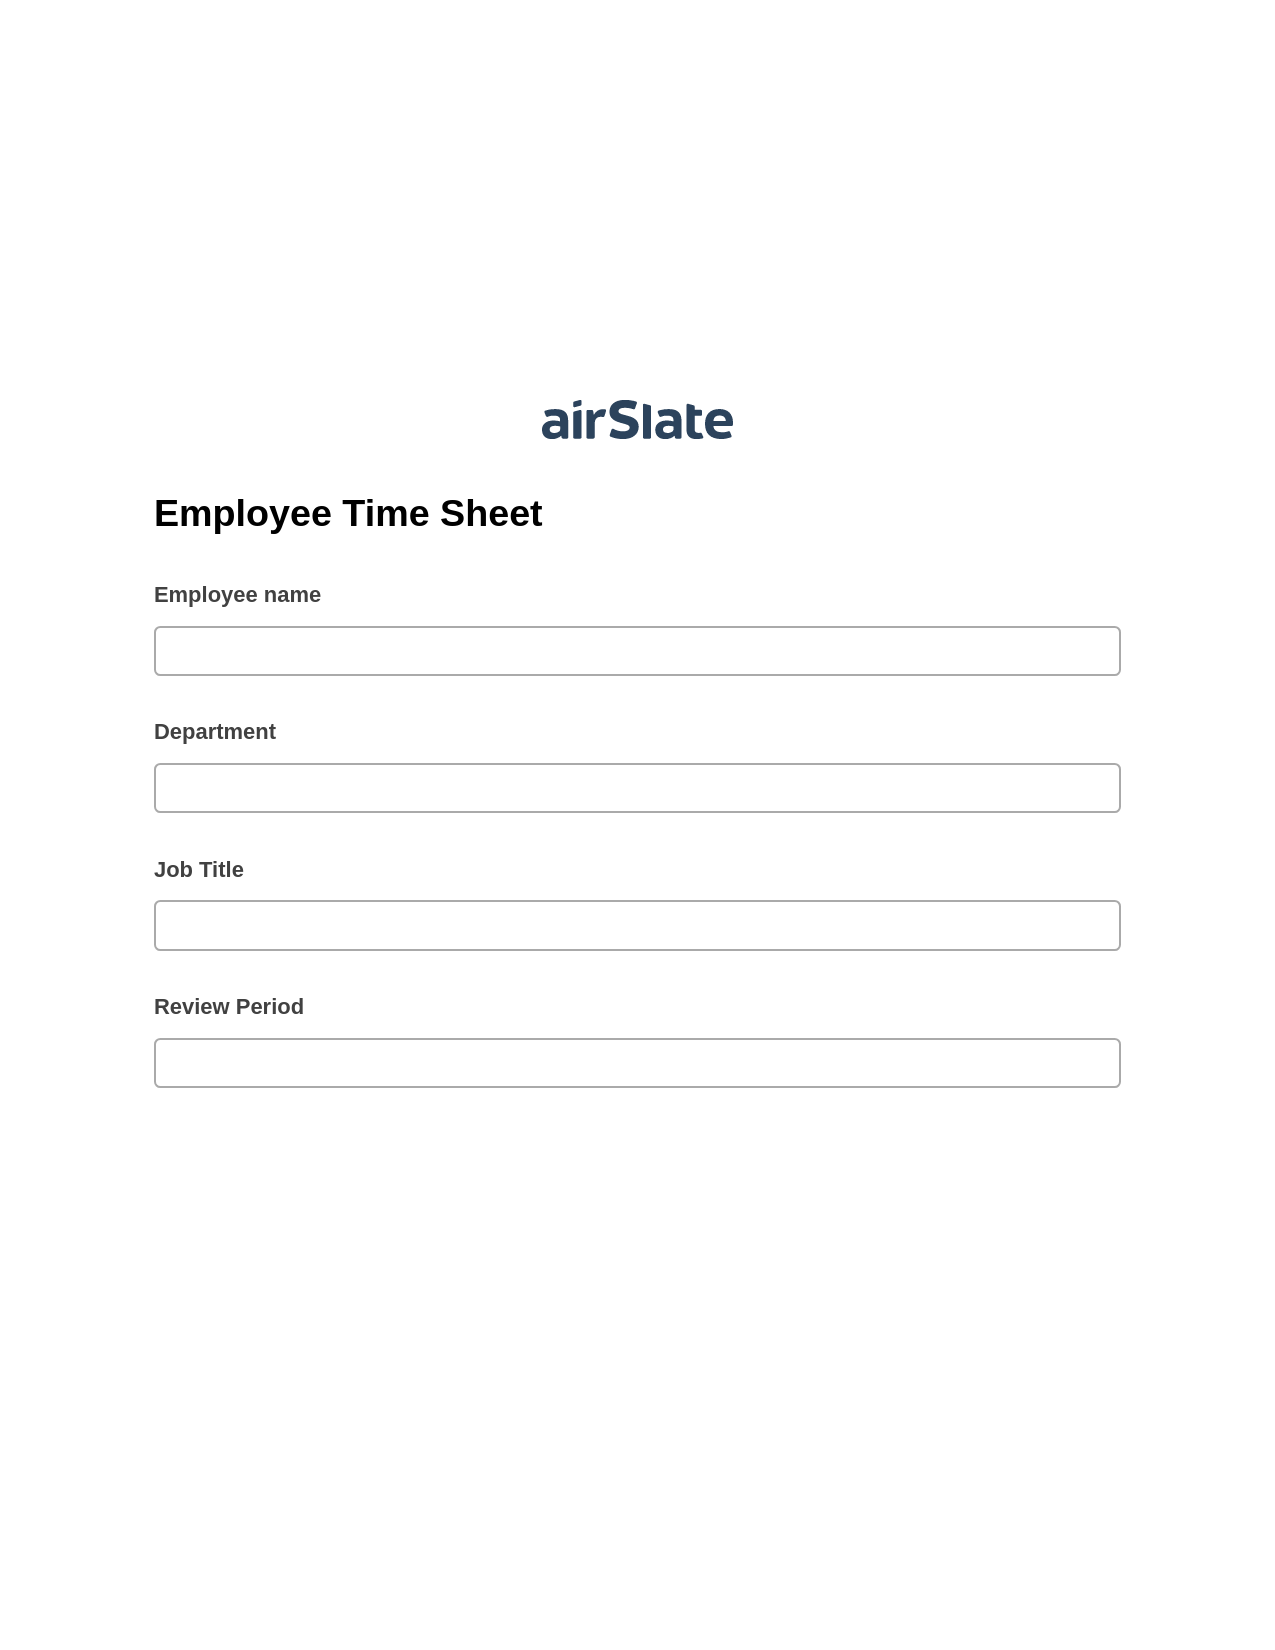 Employee Time Sheet Pre-fill from CSV File Bot, Invoke Salesforce Process Bot, Export to Excel 365 Bot